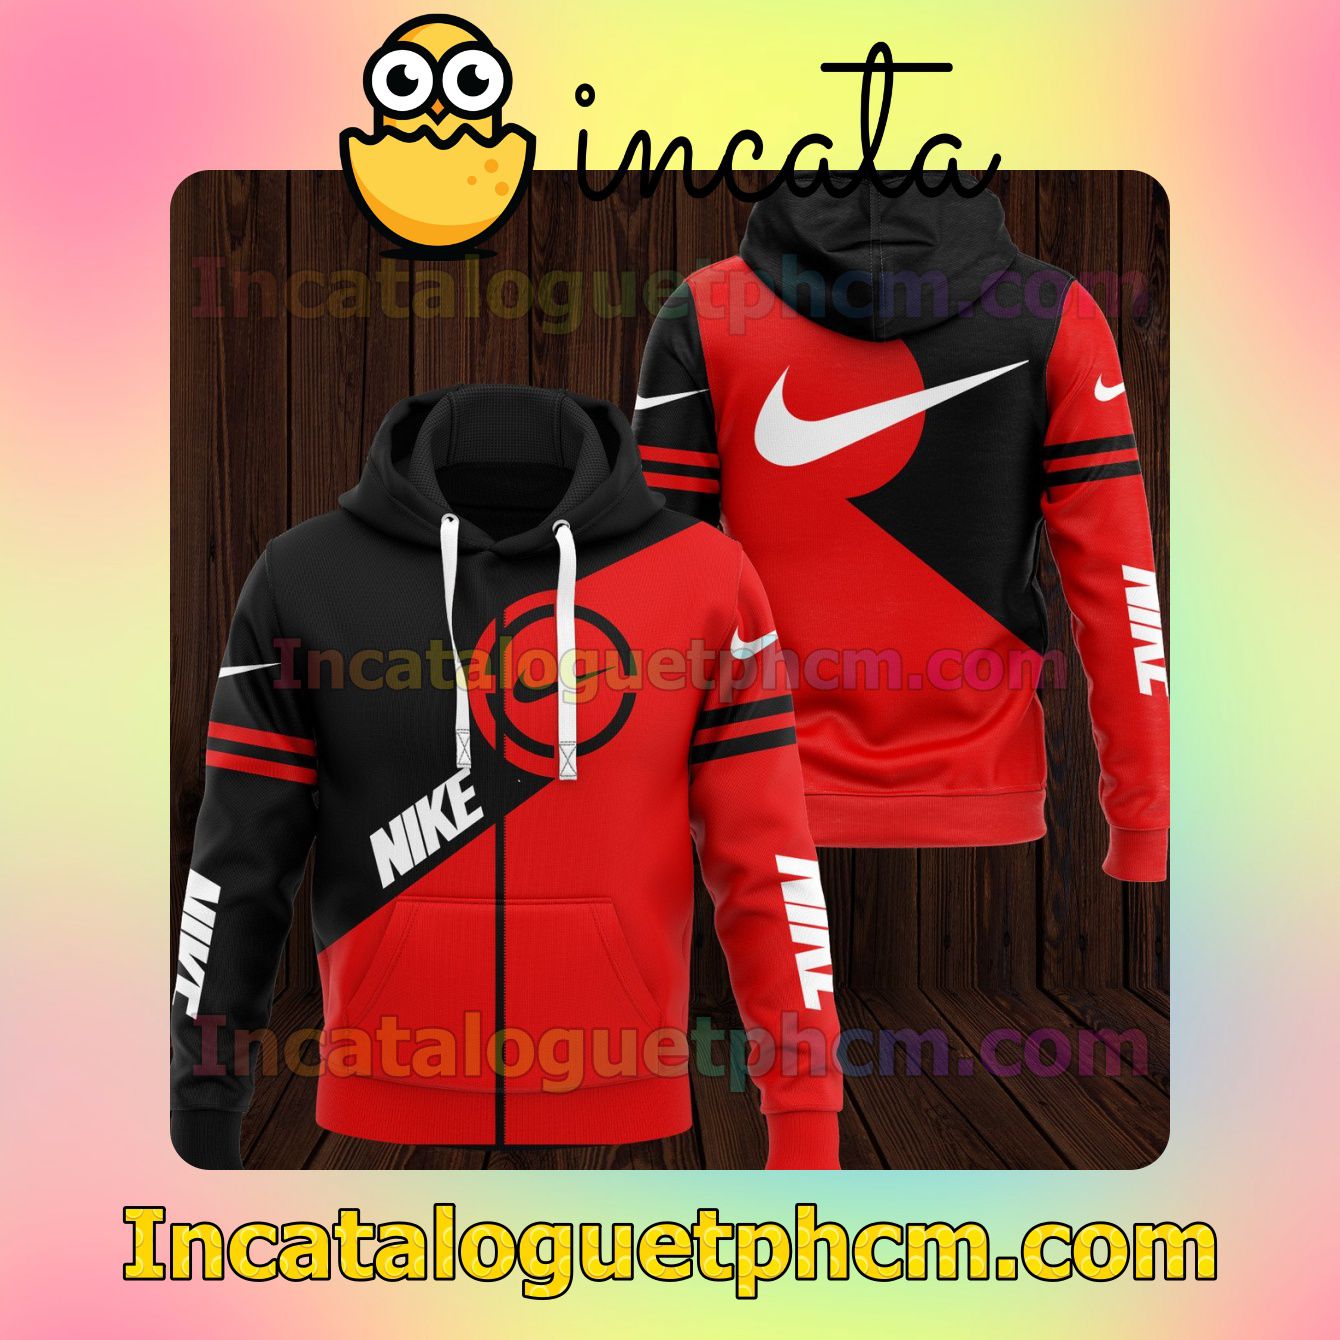 Limited Edition Nike Black And Red Long Sleeve Jacket Mens Hoodie